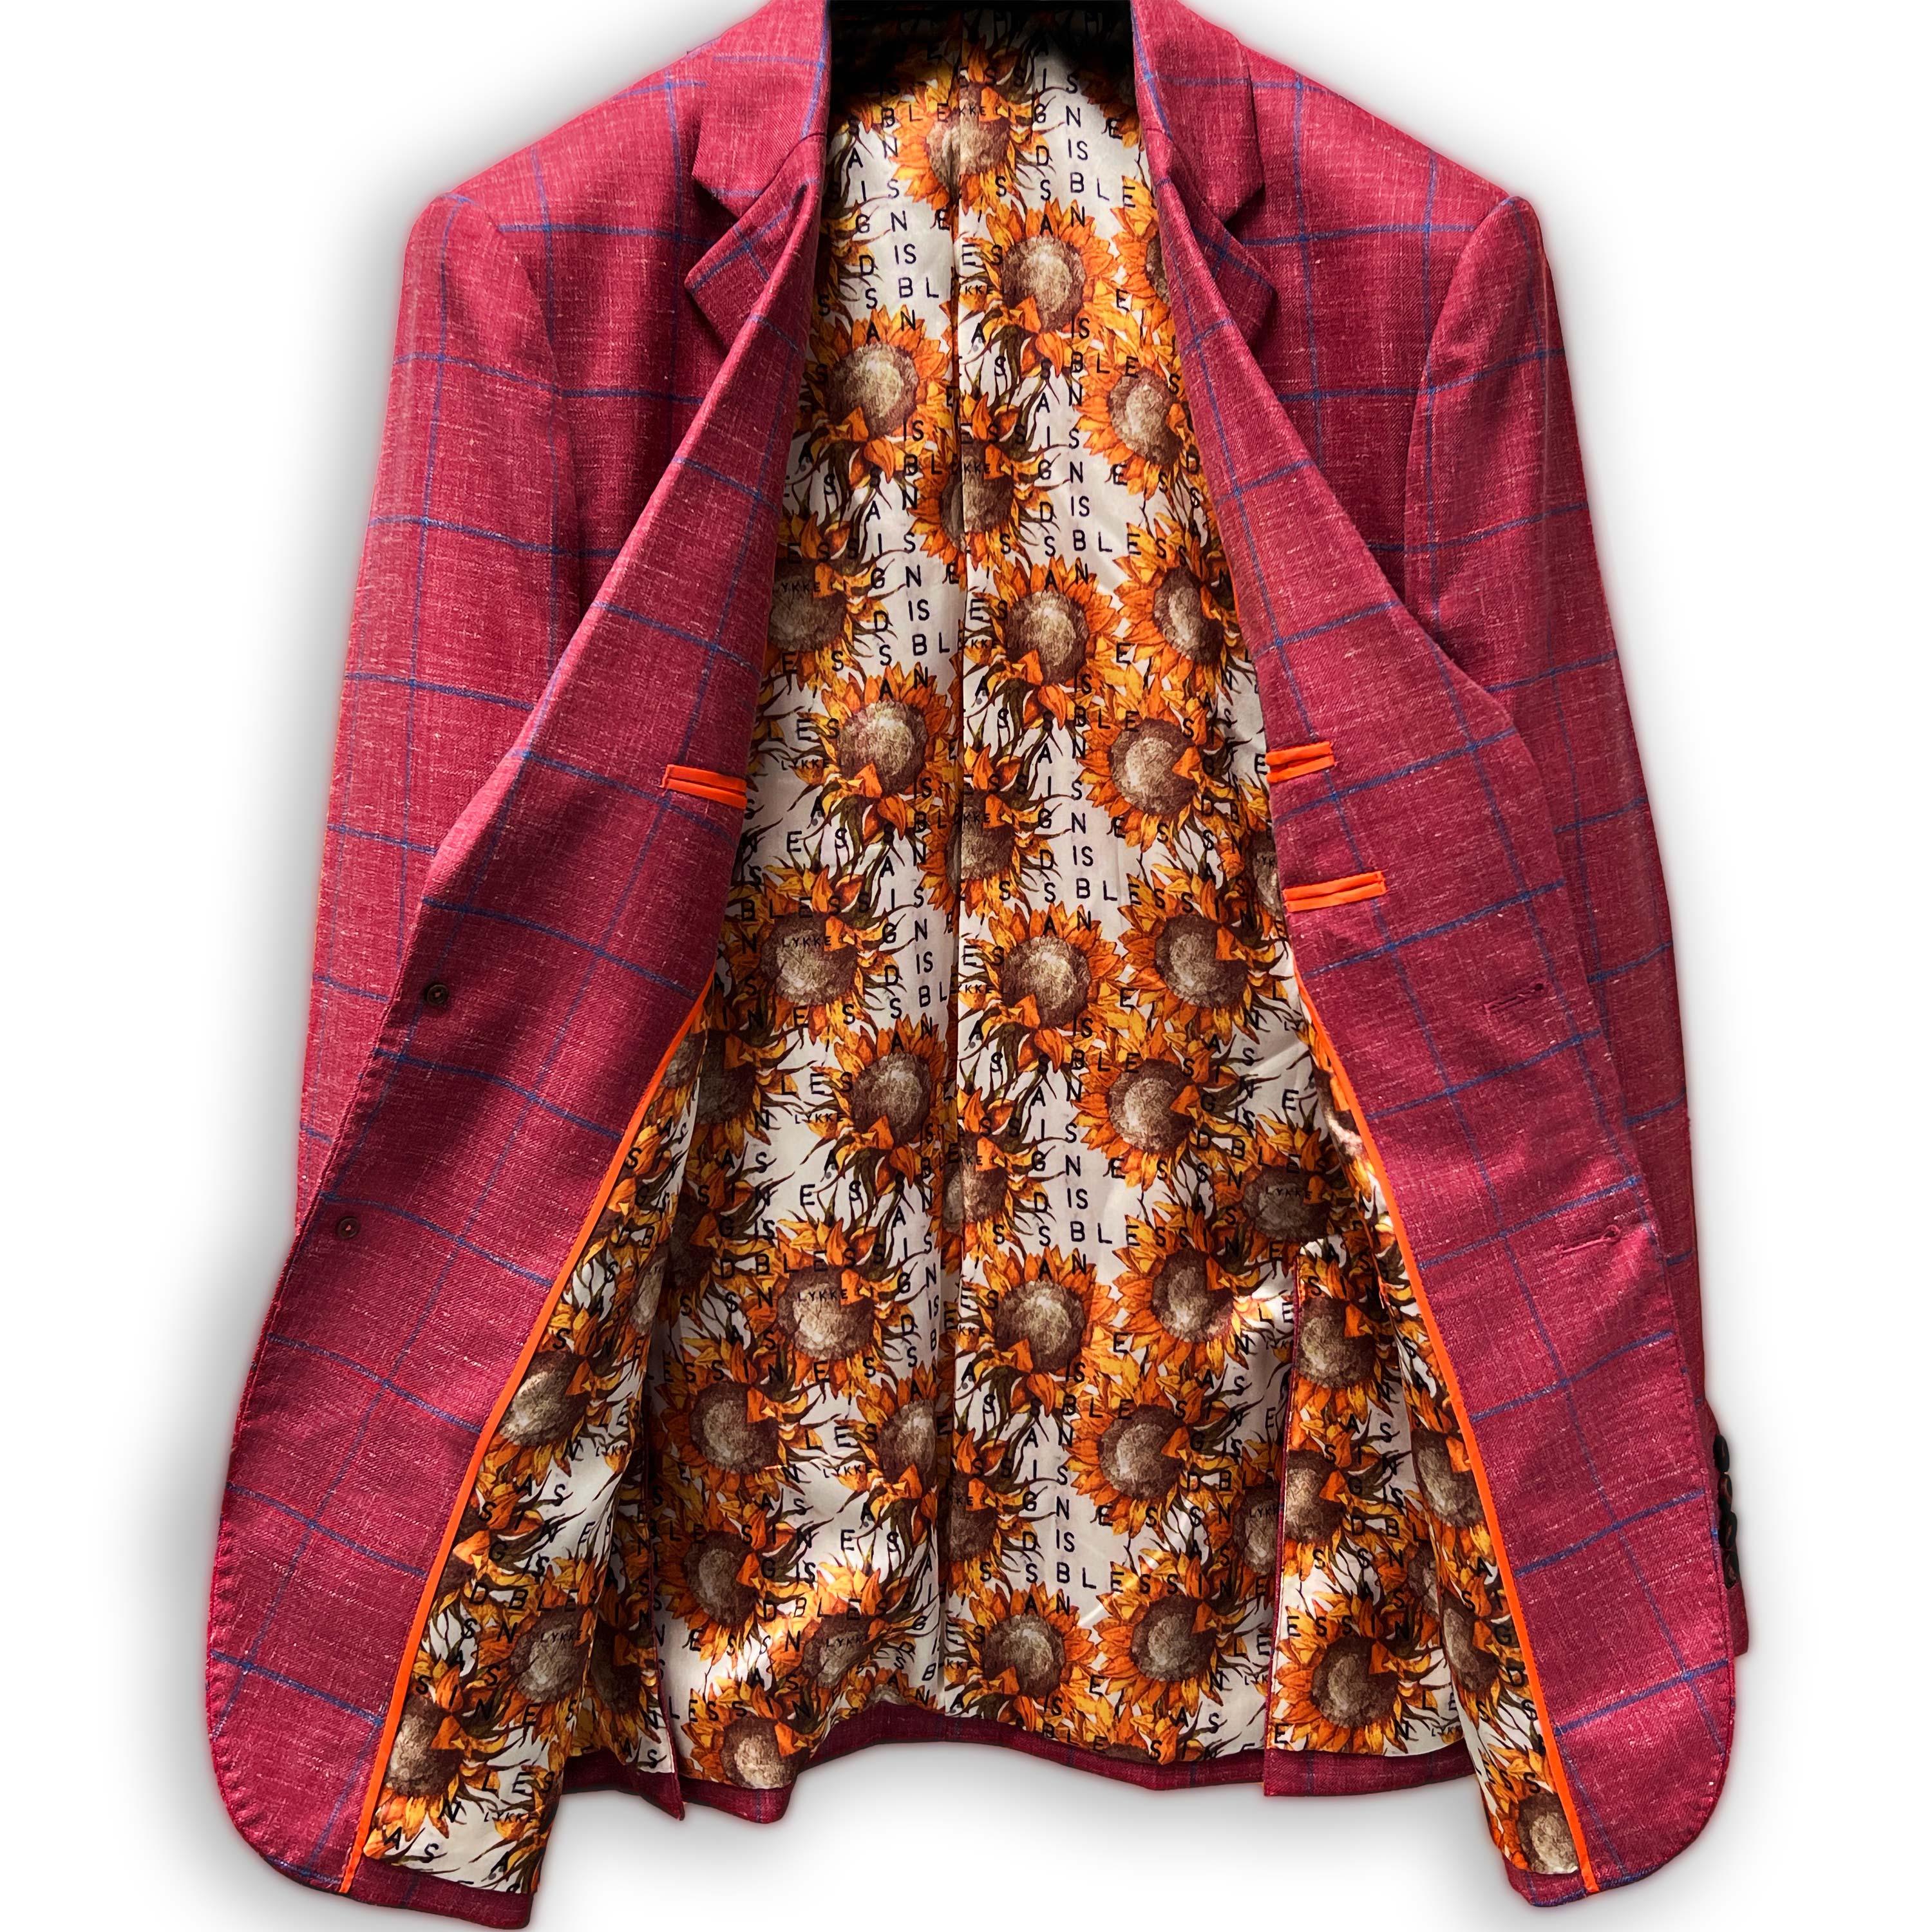 Trendy suit perfect for summer weddings, rust maroon color with royal blue highlights.